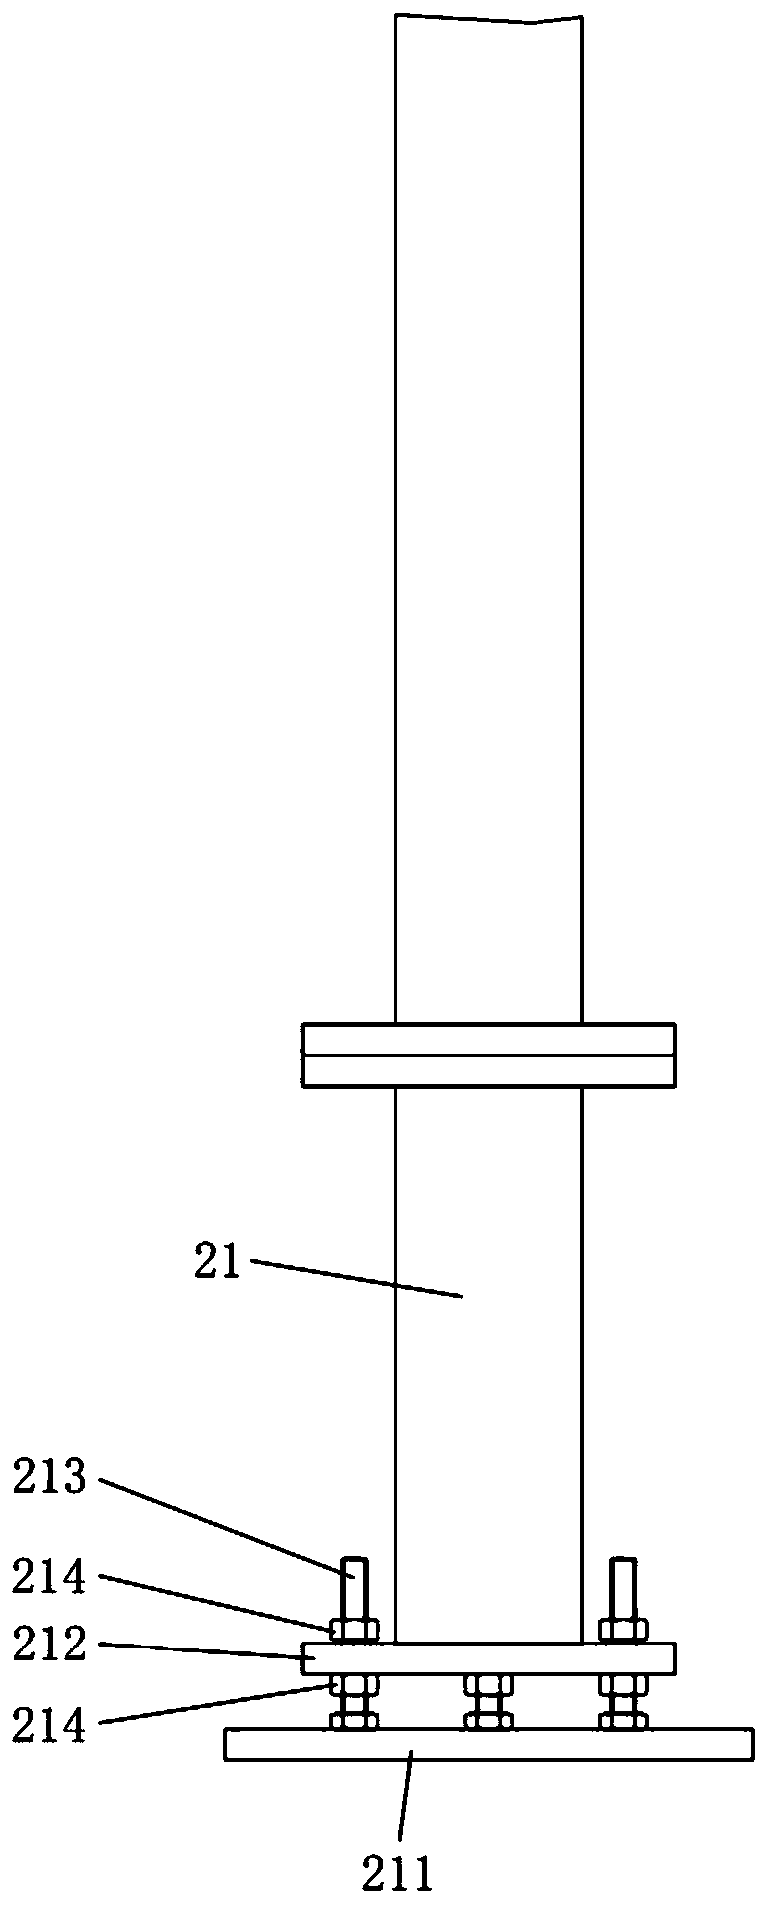 Workpiece bearing platform and heating device for testing reflectivity of wave absorbing material